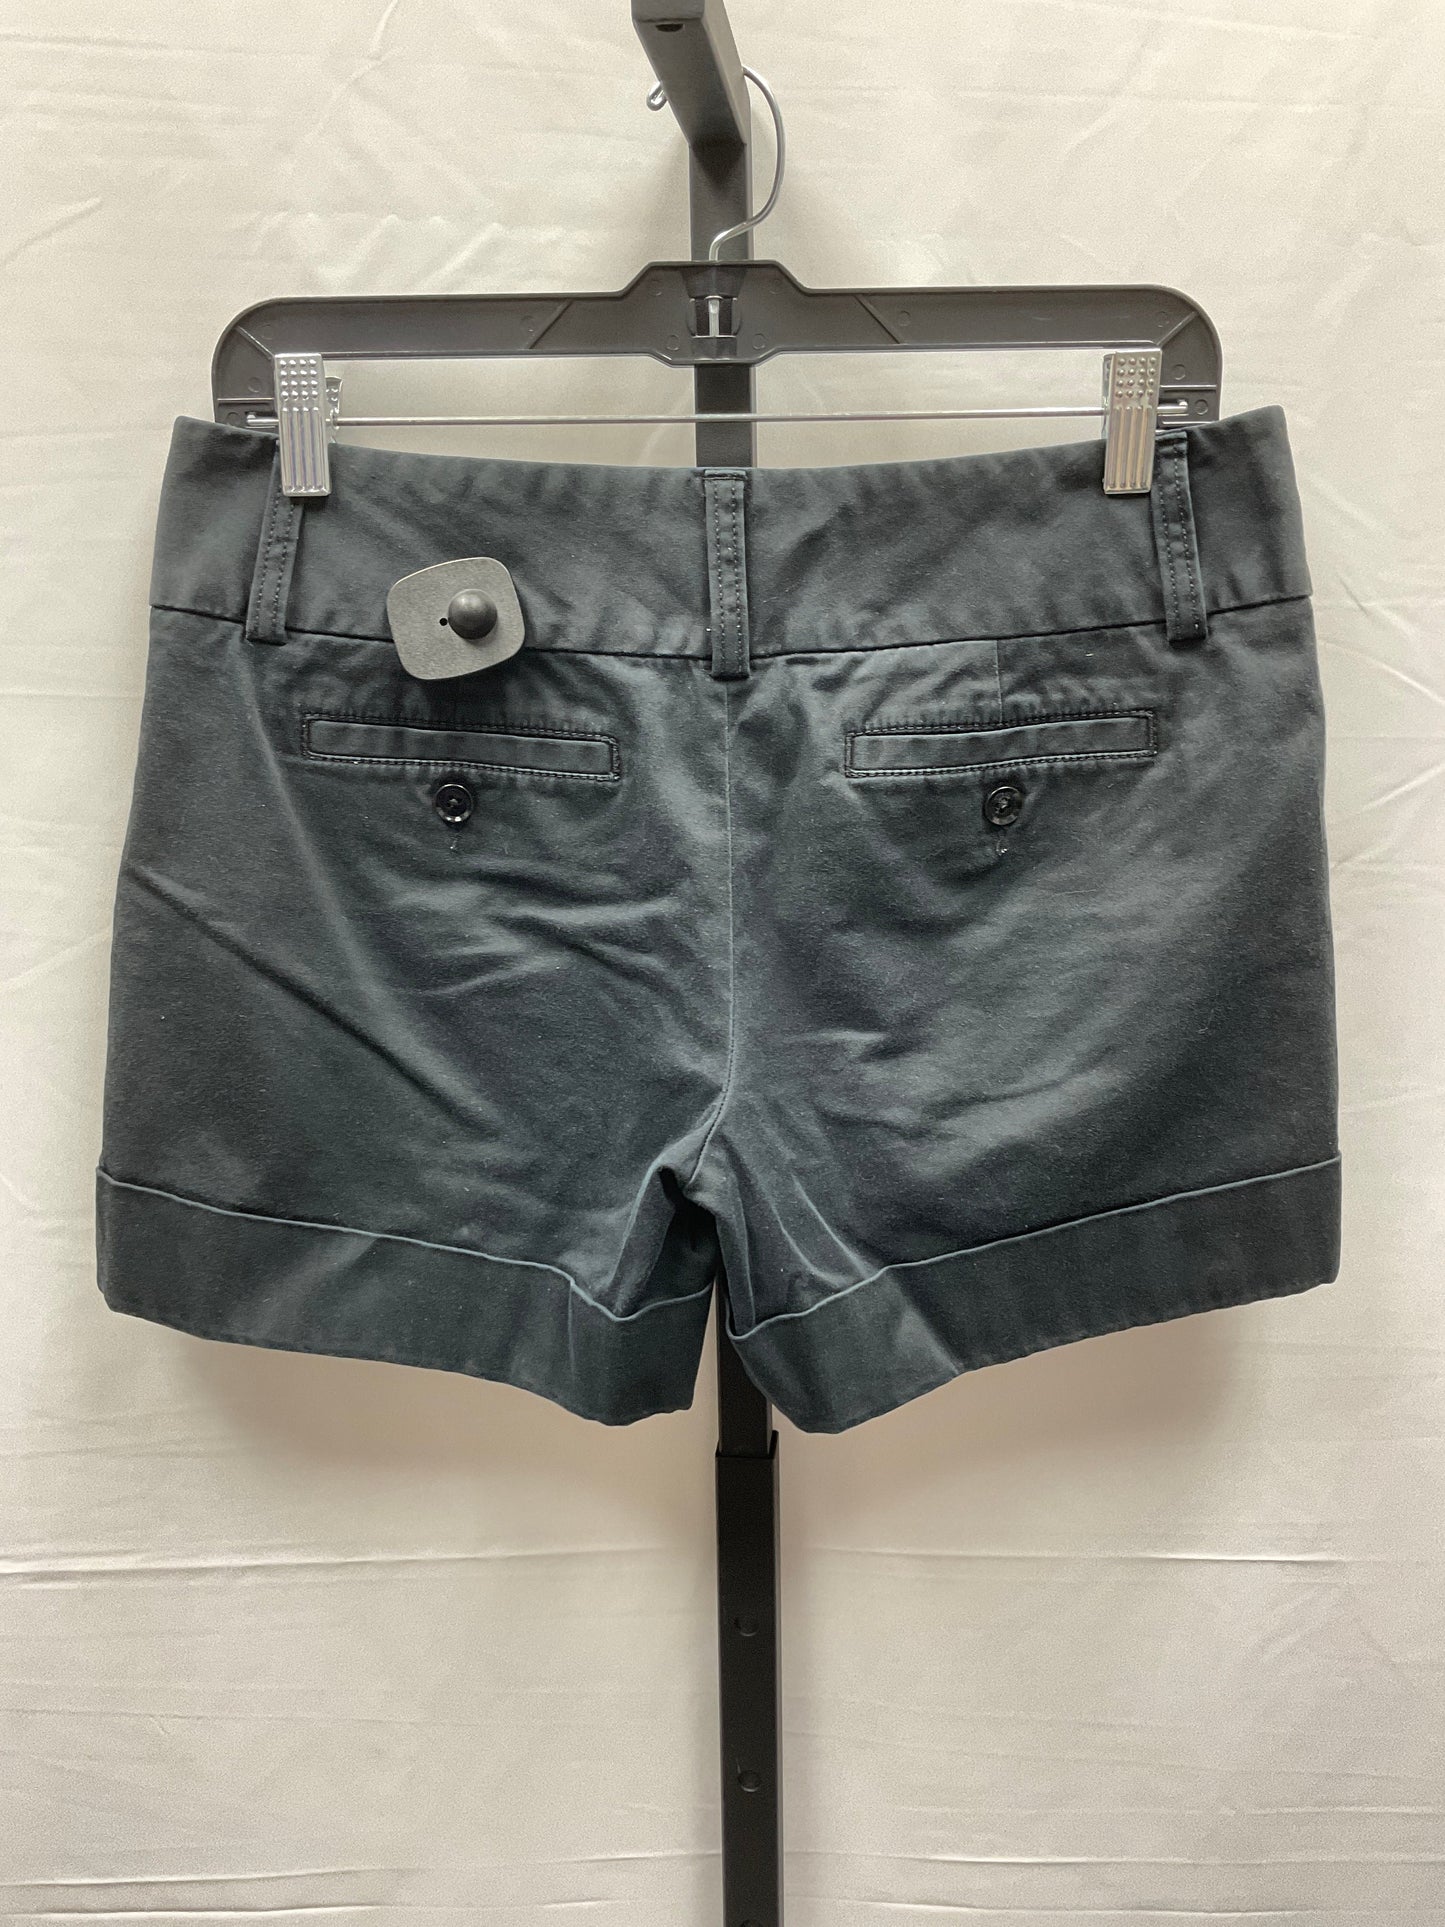 Shorts By Express Design Studio  Size: 8